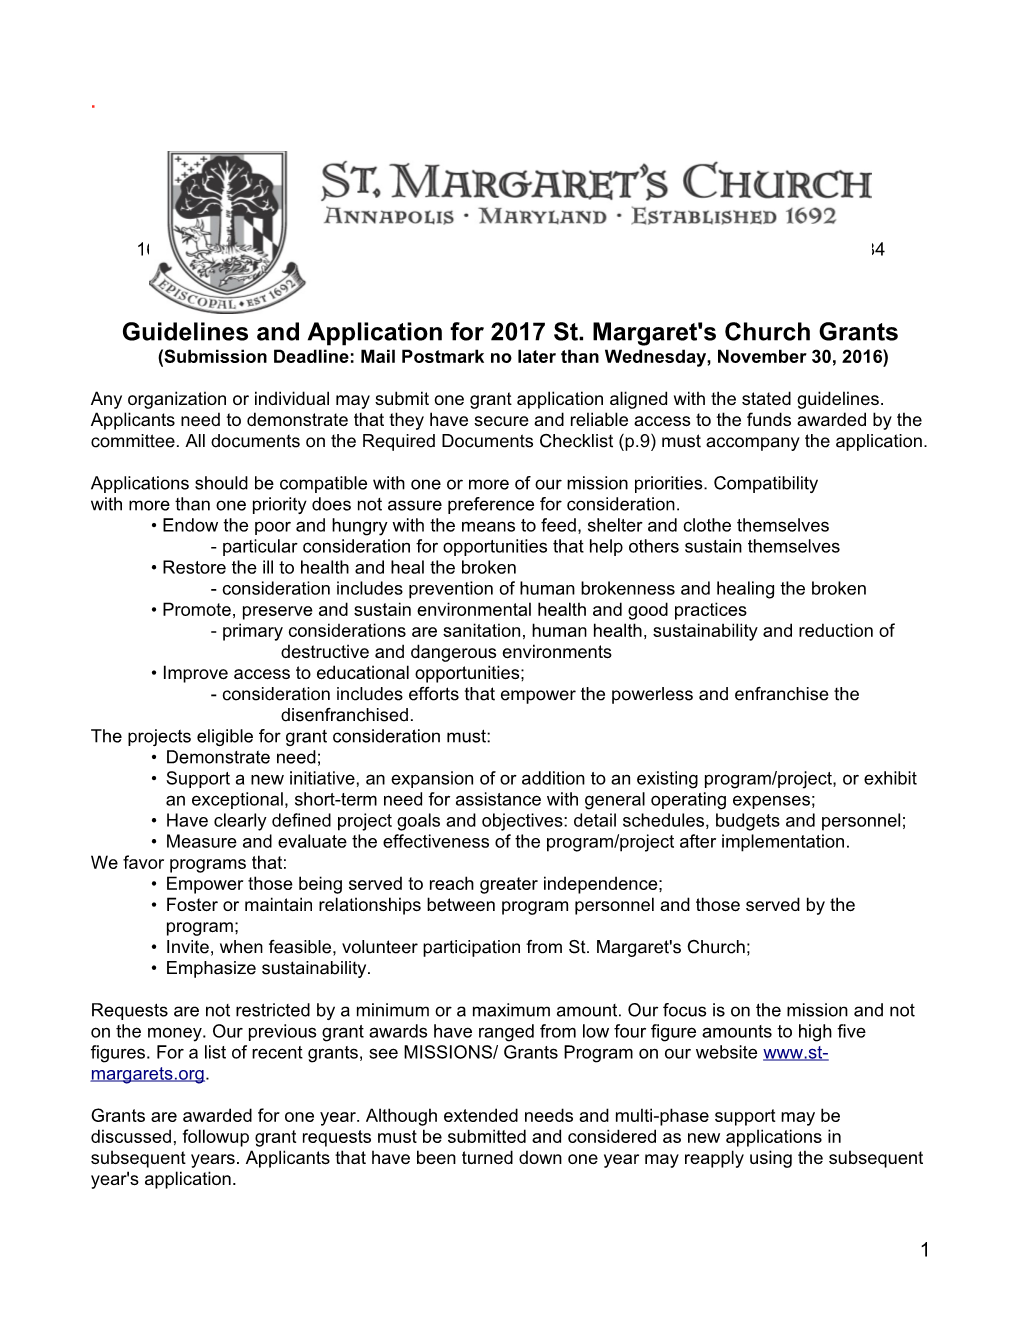 Guidelines and Application for 2017 St. Margaret's Church Grants